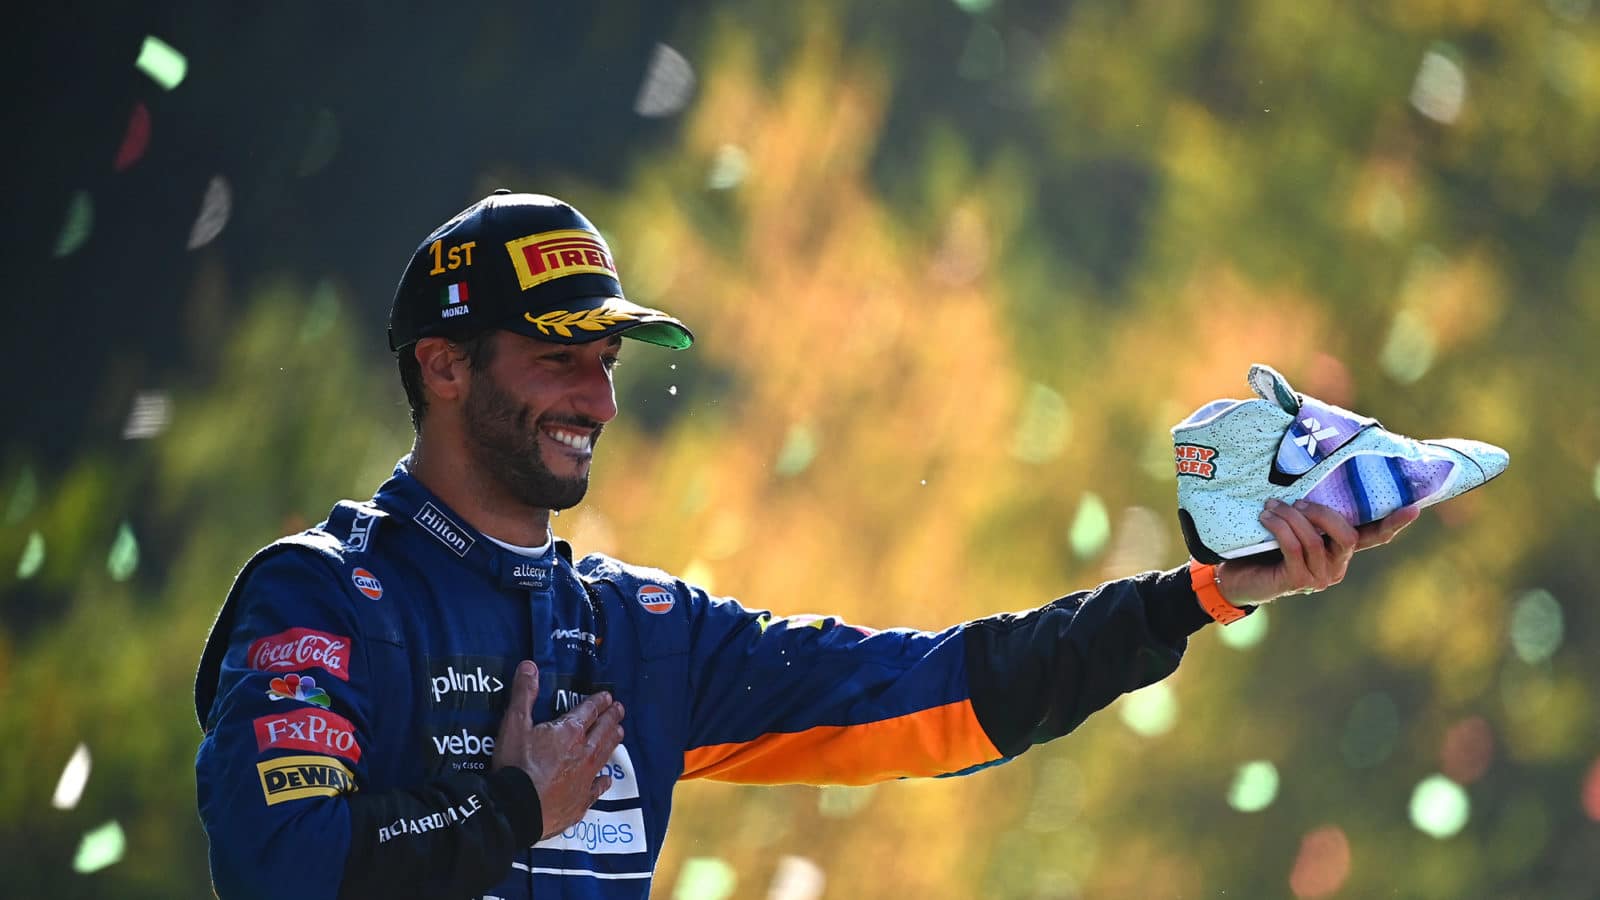 Daniel Ricciardo holds out his shoe after winning the 2021 Italian Grand Prix at Monza